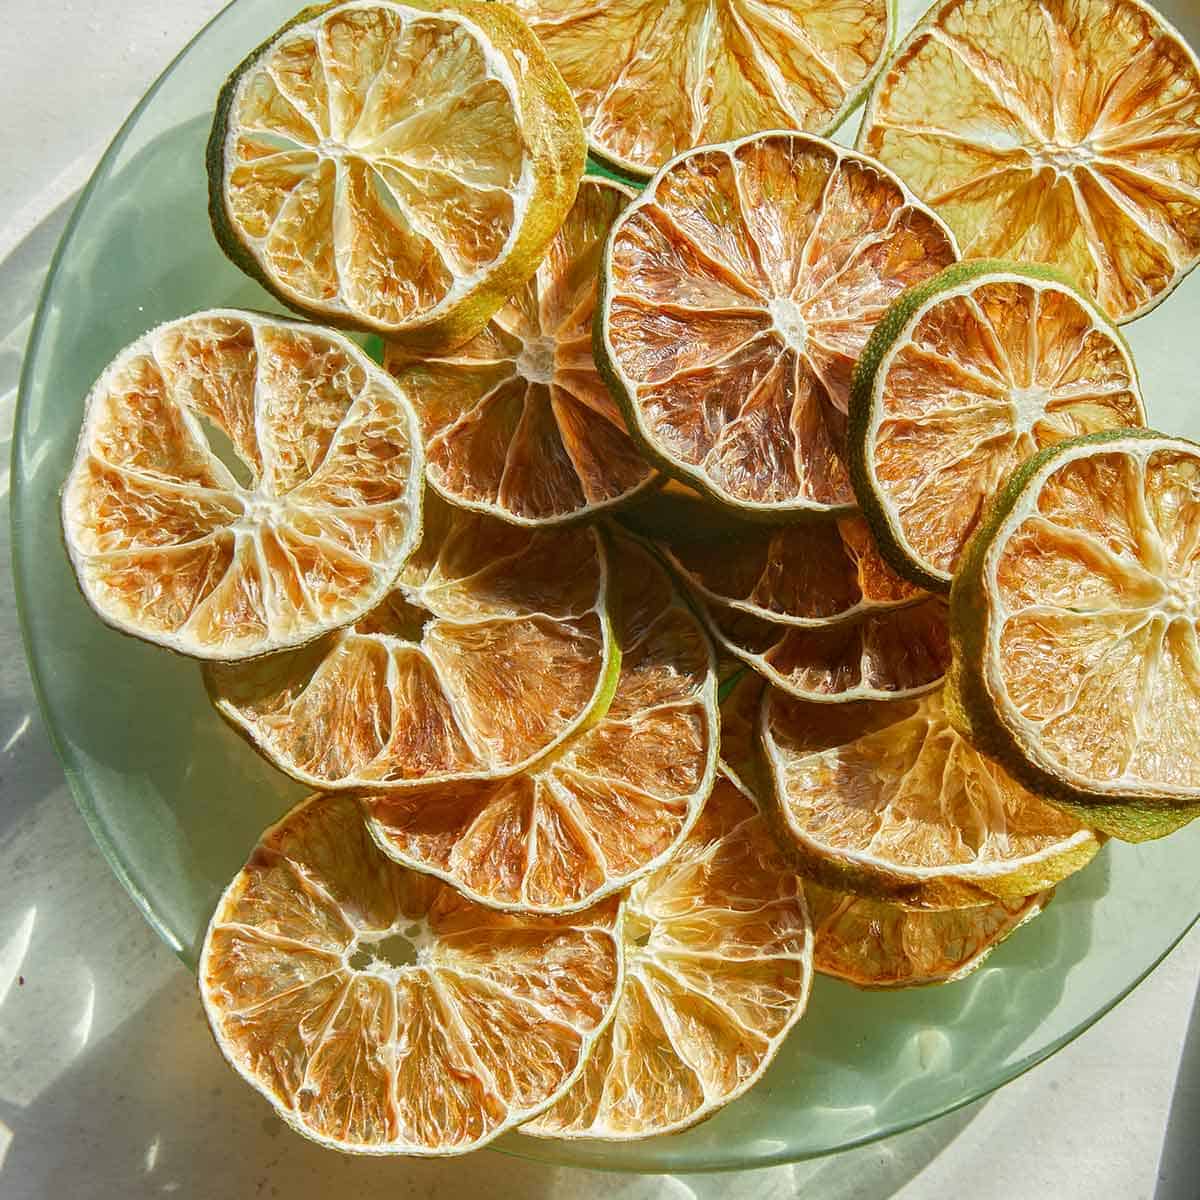 Castle Towers - Want to DIY your own dehydrated citrus